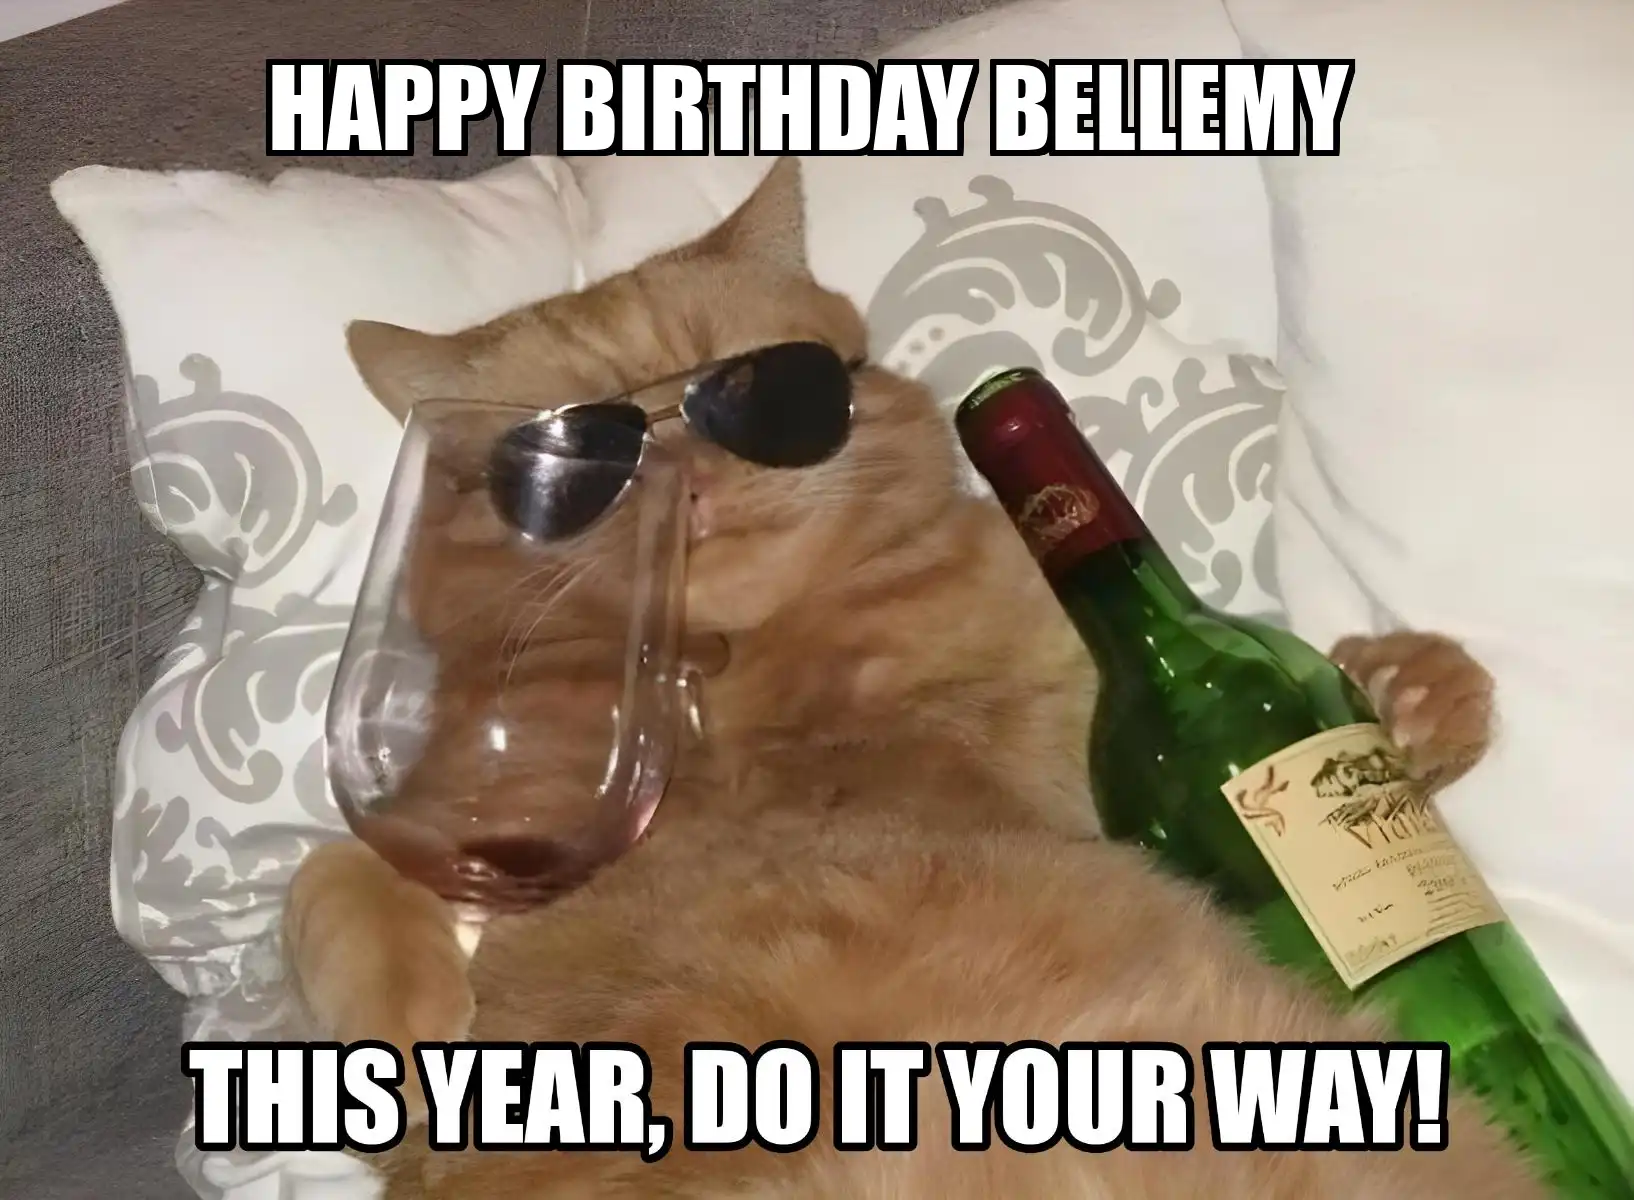 Happy Birthday Bellemy This Year Do It Your Way Meme